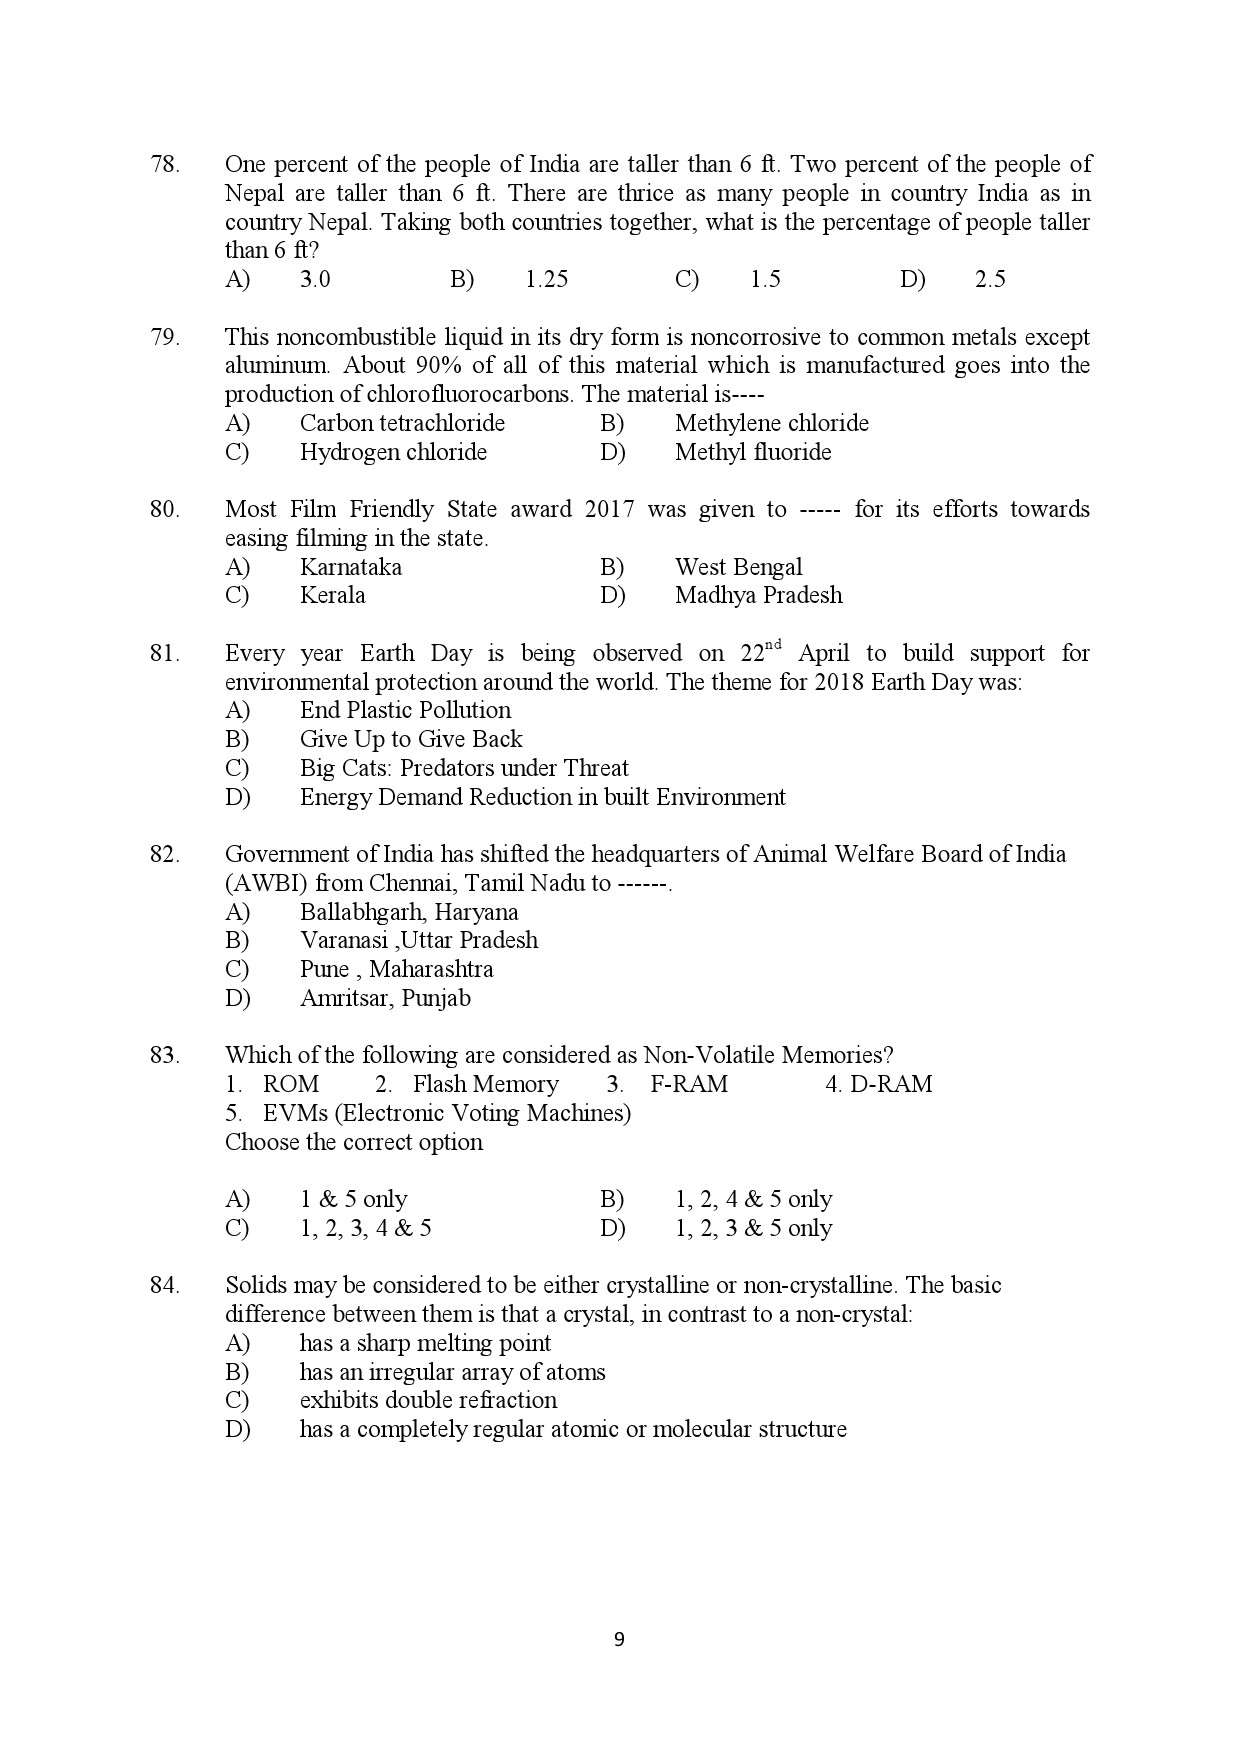 Kerala SET General Knowledge Exam Question Paper July 2018 9